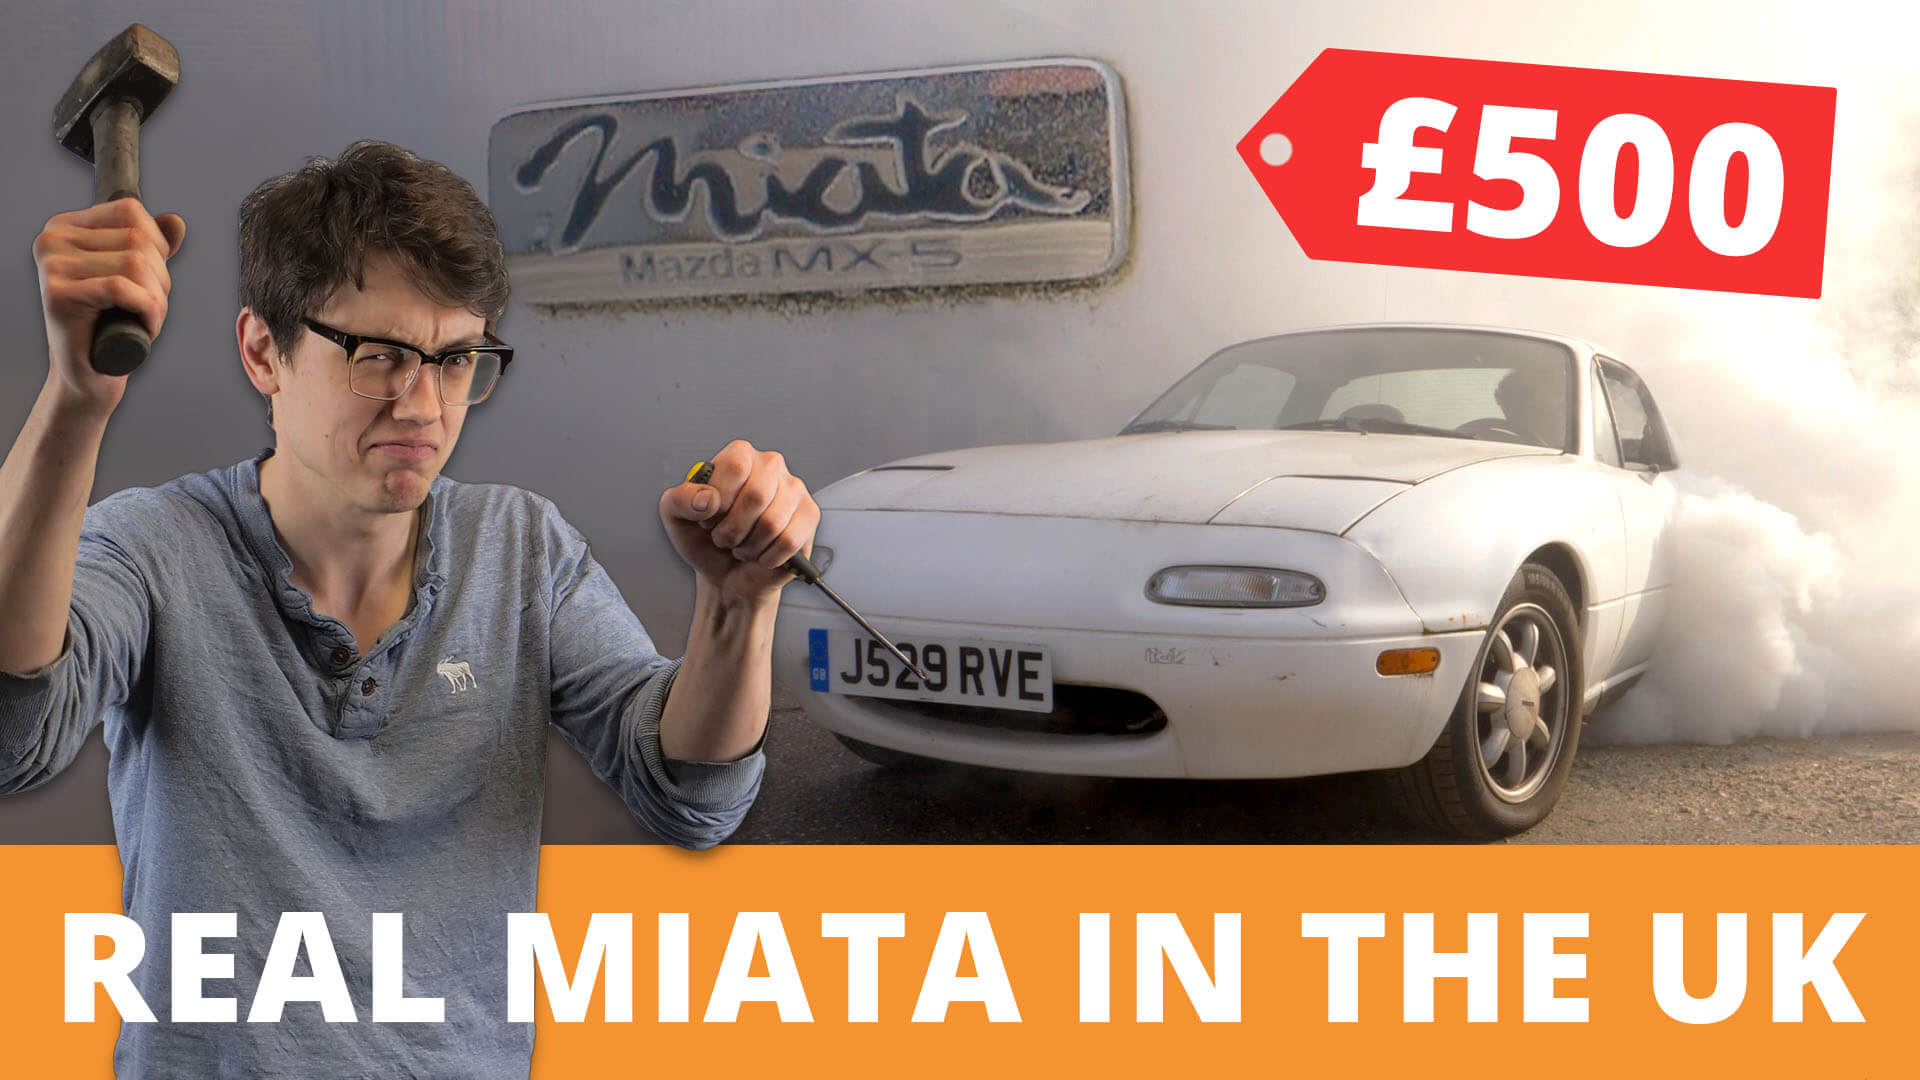 We Smash All The Rust Out Of Our £500 REAL MIATA With A Hammer